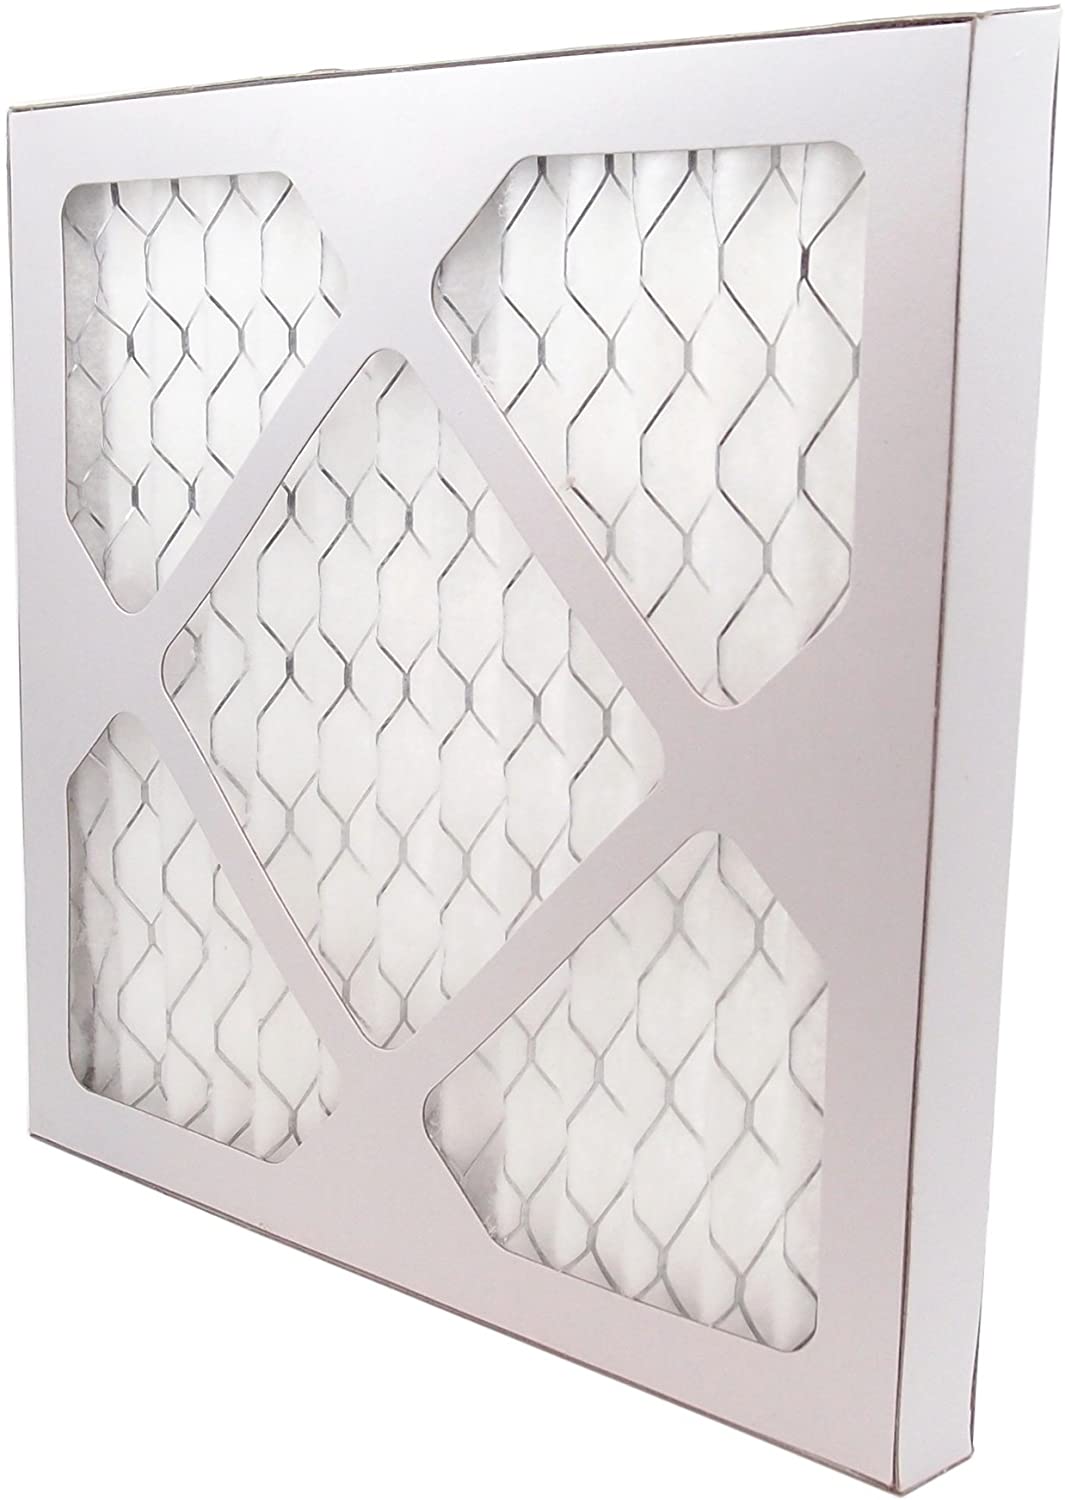 30&quot; x 8&quot; Pleated MERV 8 Filter for HVAC Return Filter Grille [Actual Dimensions: 29.75 X 7.75] 3-Pack